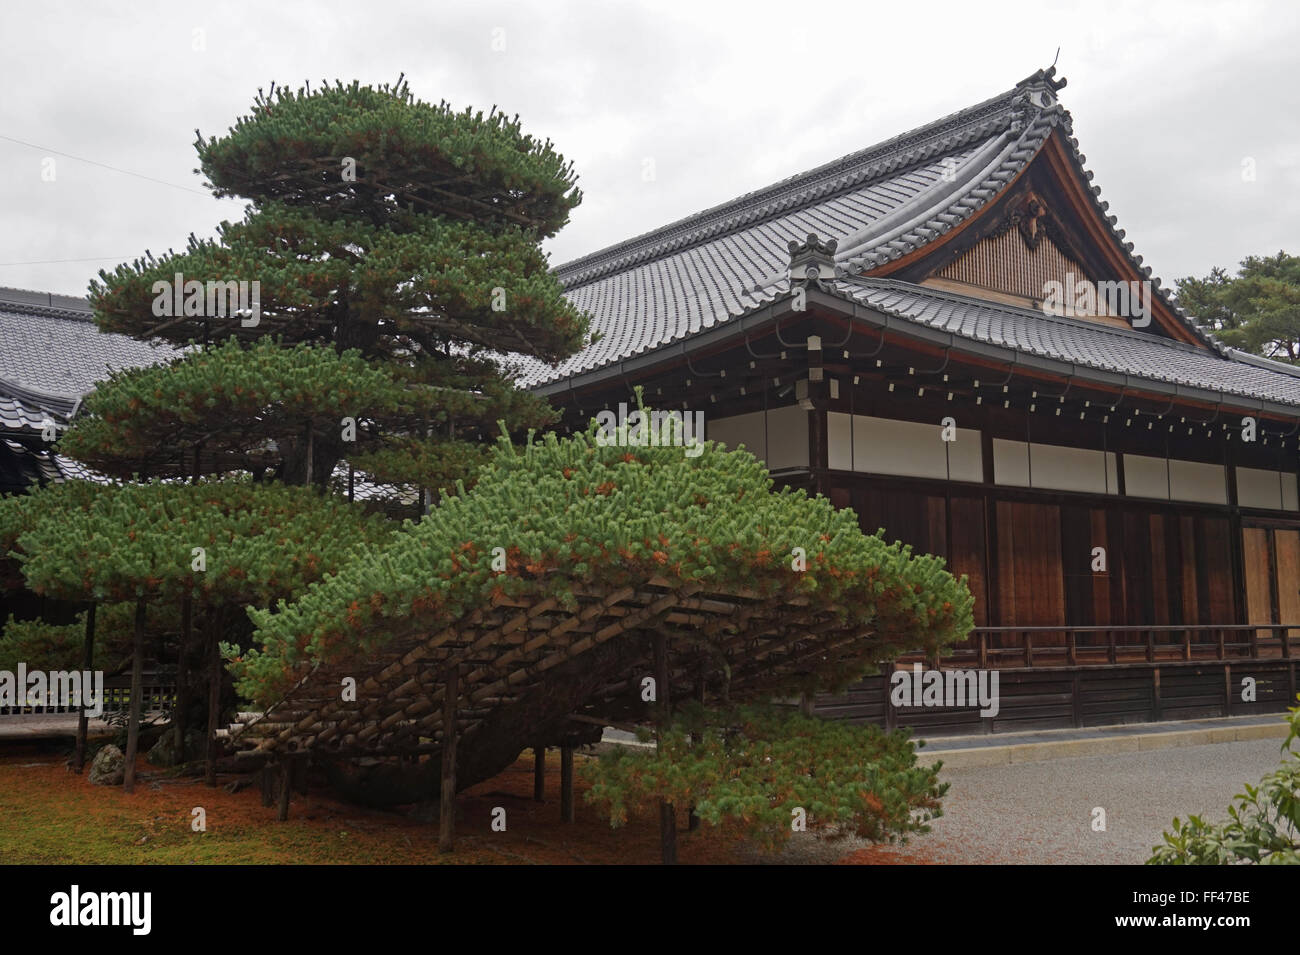 The 600-year old dwarf pine tree by a black and white building at the Kinkaku-ji - the Golden Temple, Kyoto, Japan Stock Photo